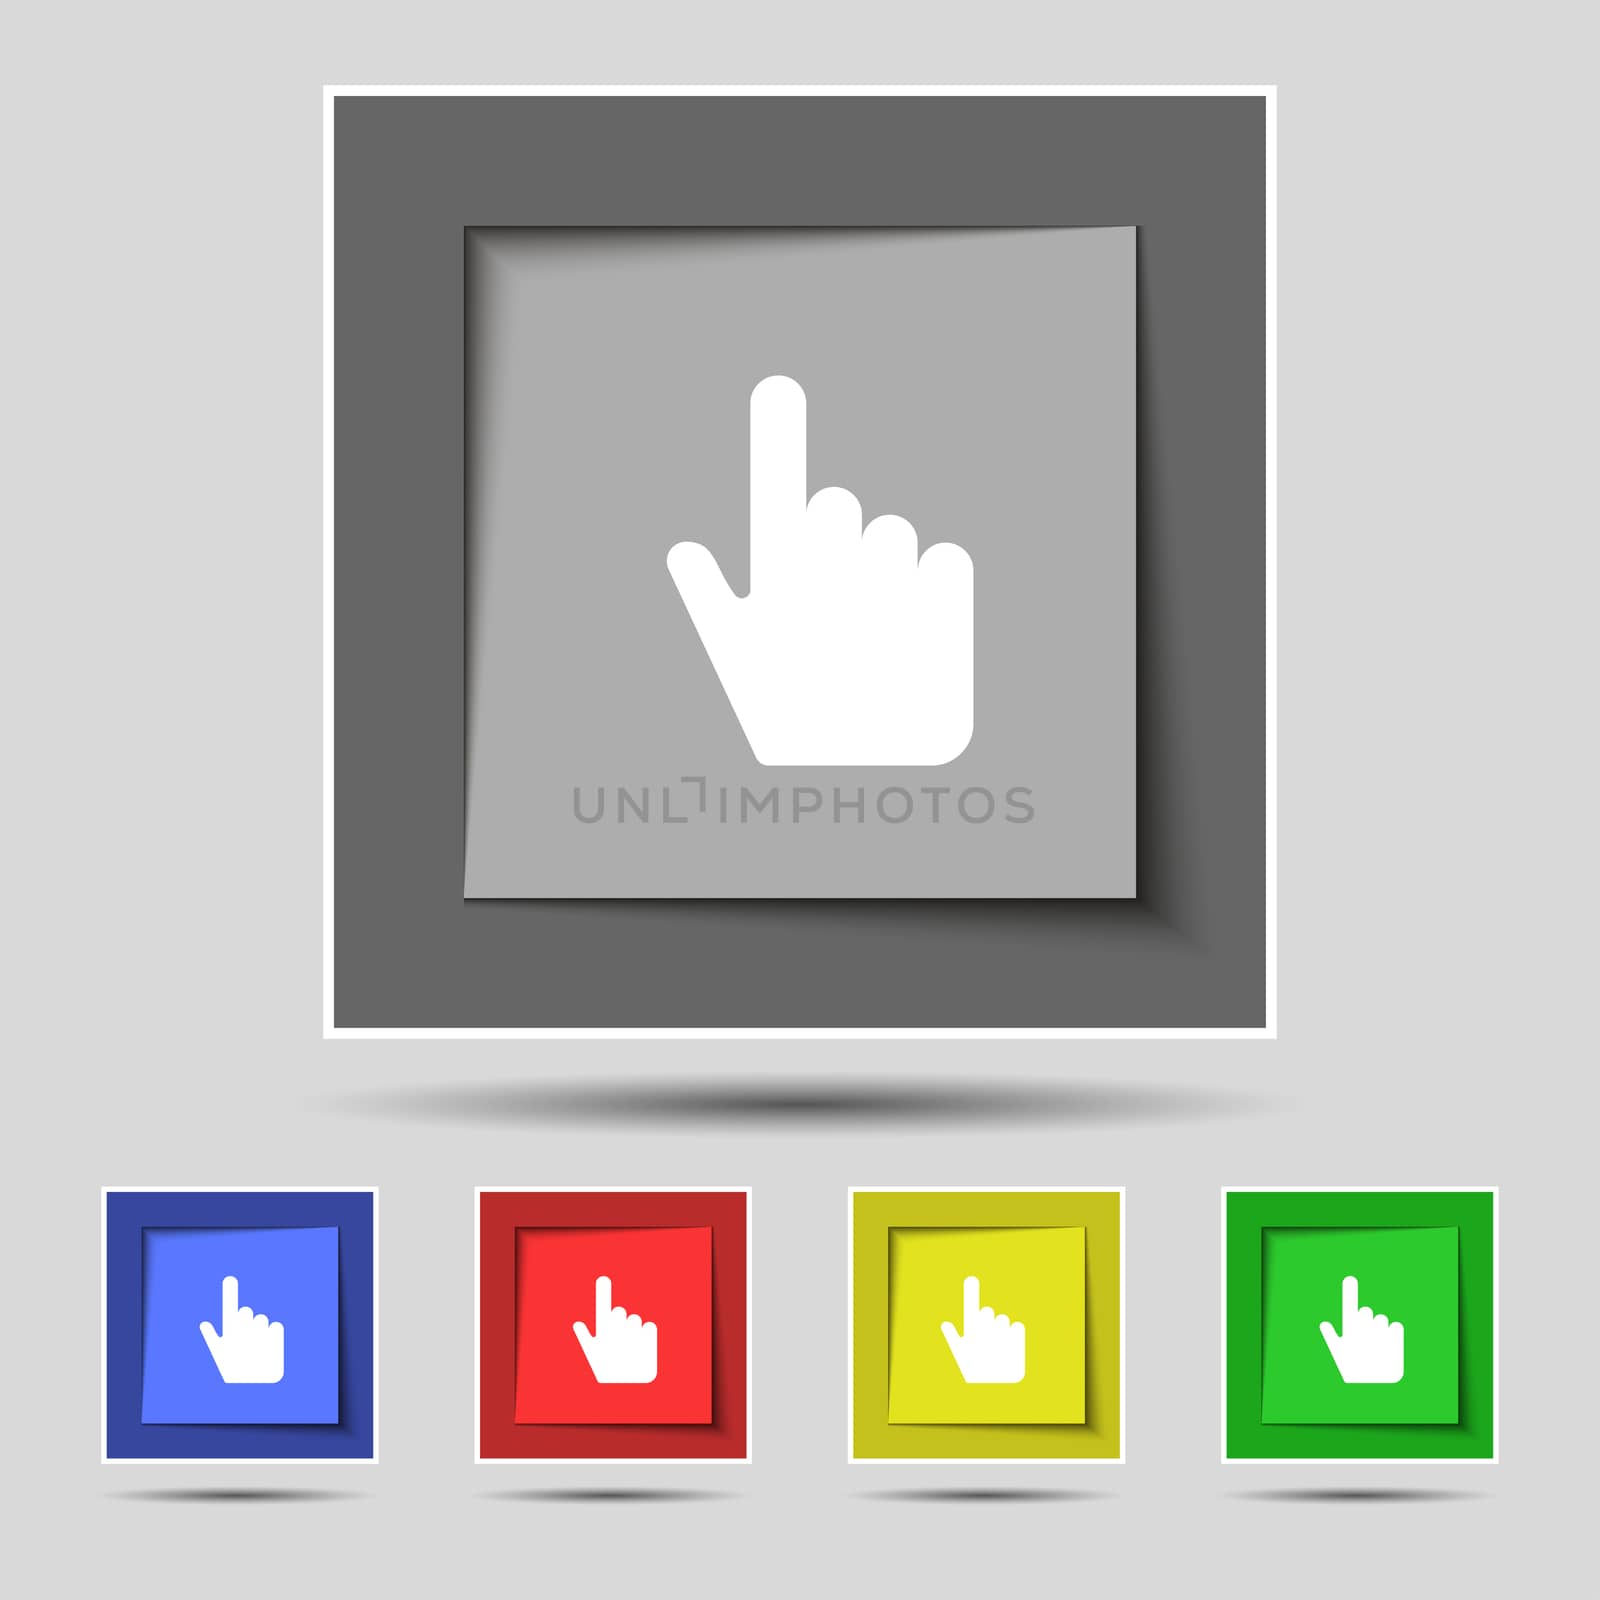 cursor icon sign on original five colored buttons. illustration